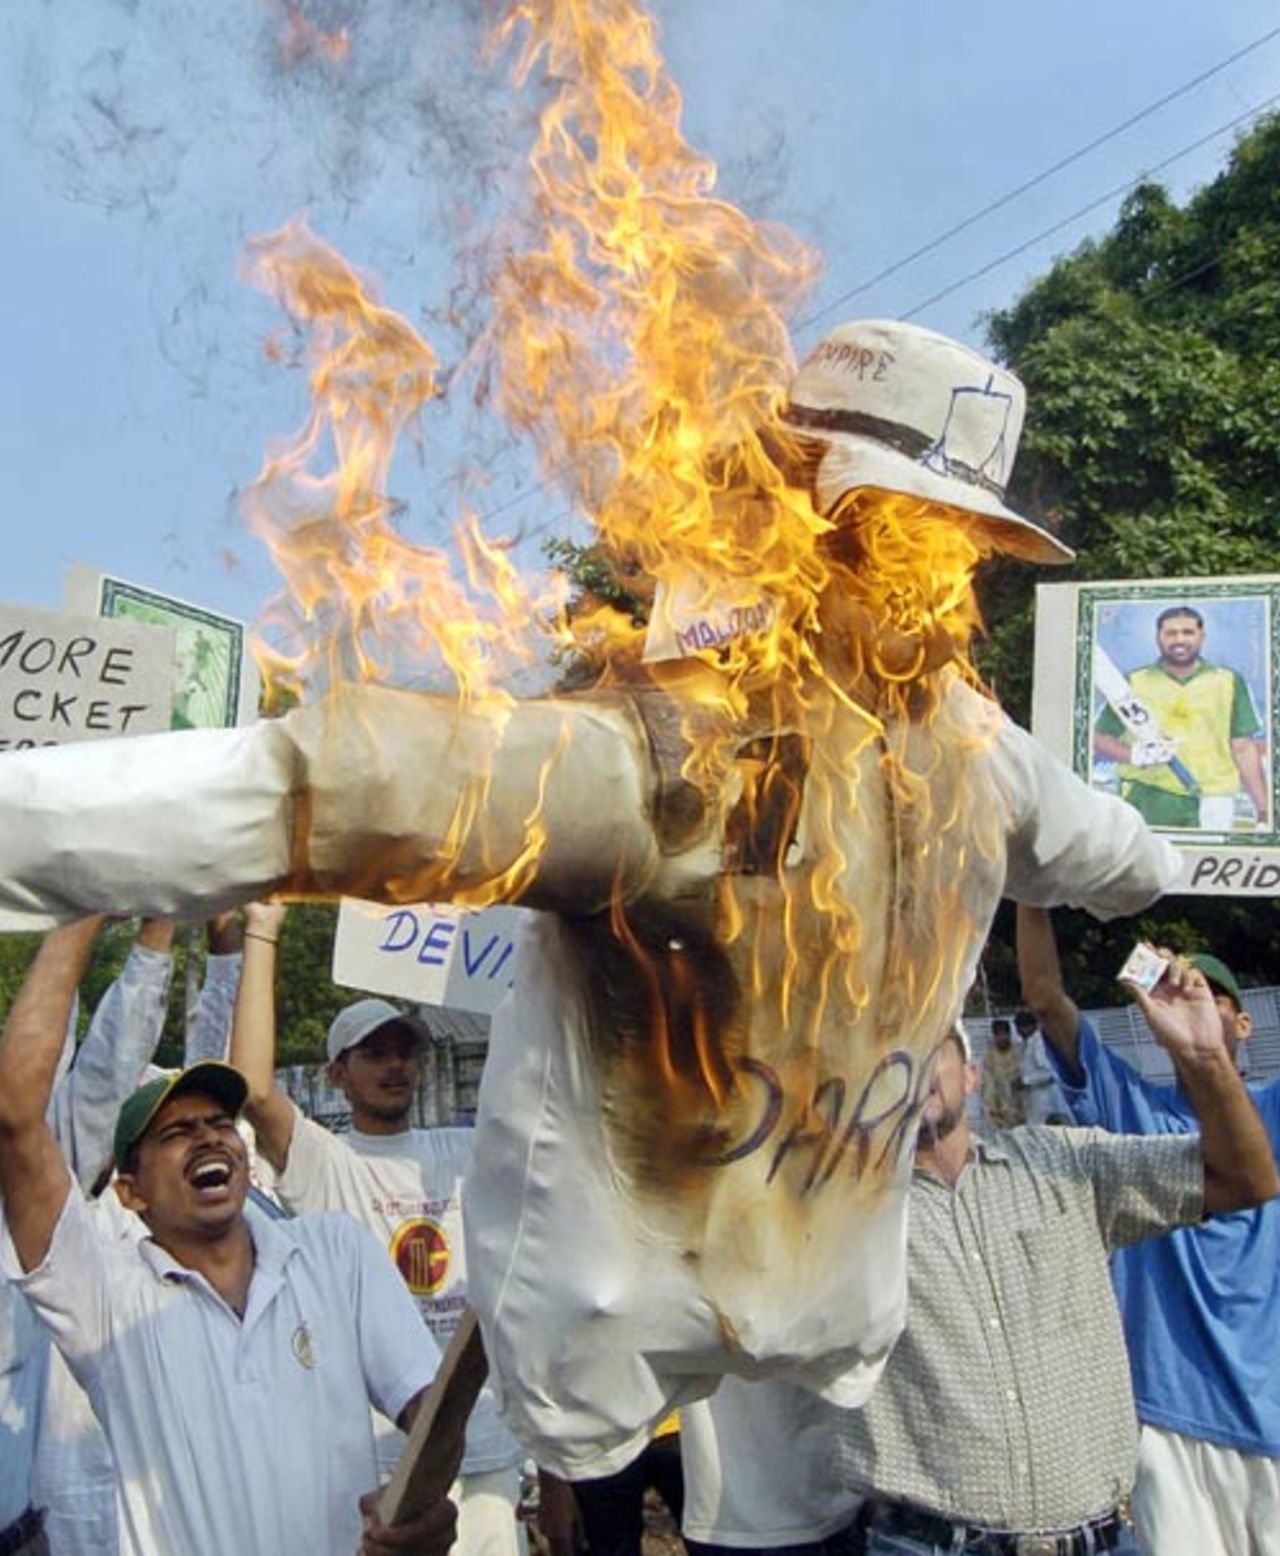 Pakistani protestors burn an effigy of Darrell Hair during a rally, Lahore, August 23, 2006